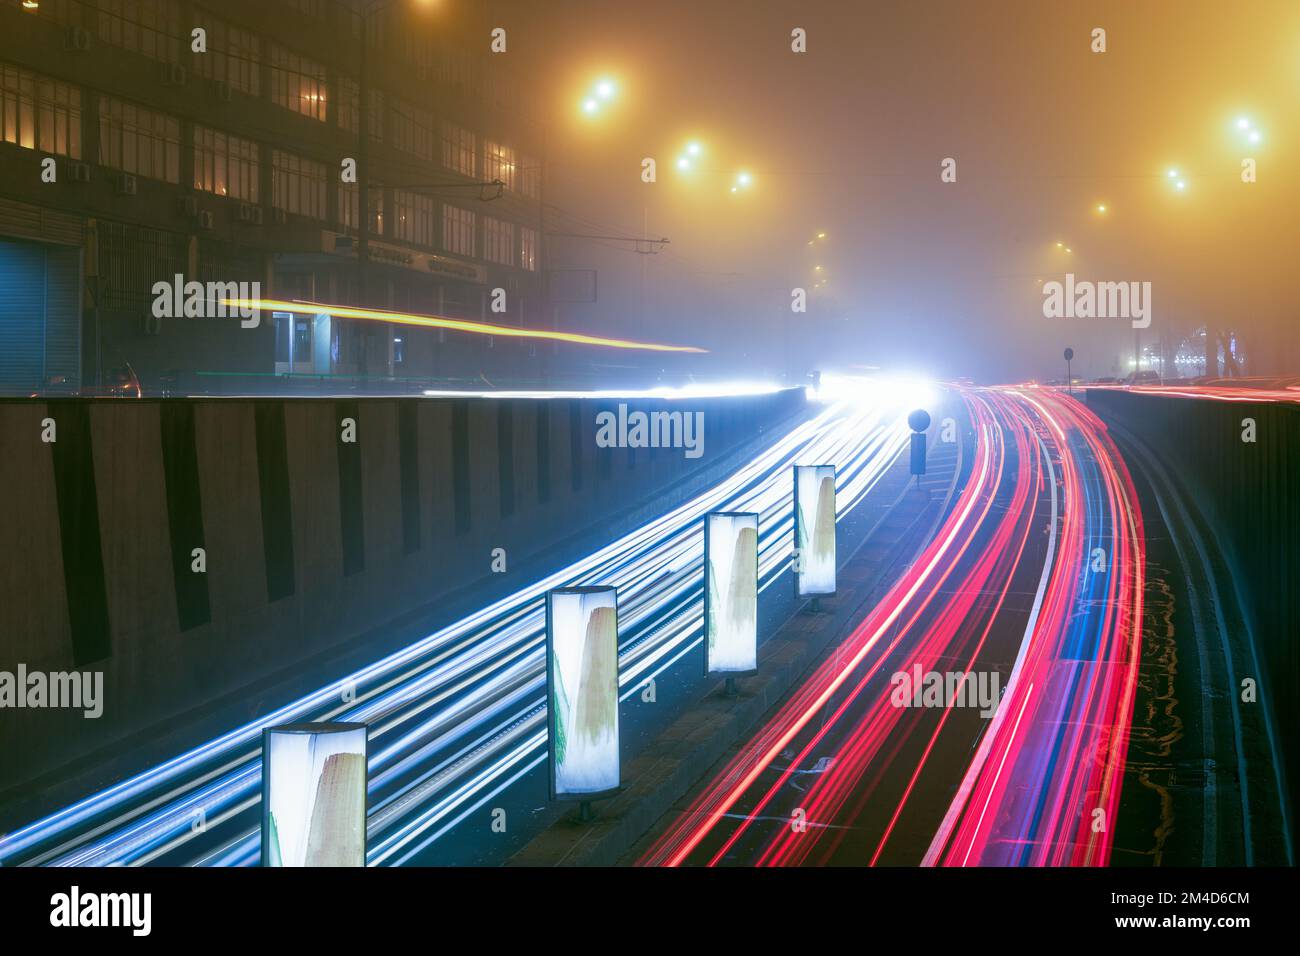 Light trails of moving cars in the city Stock Photo